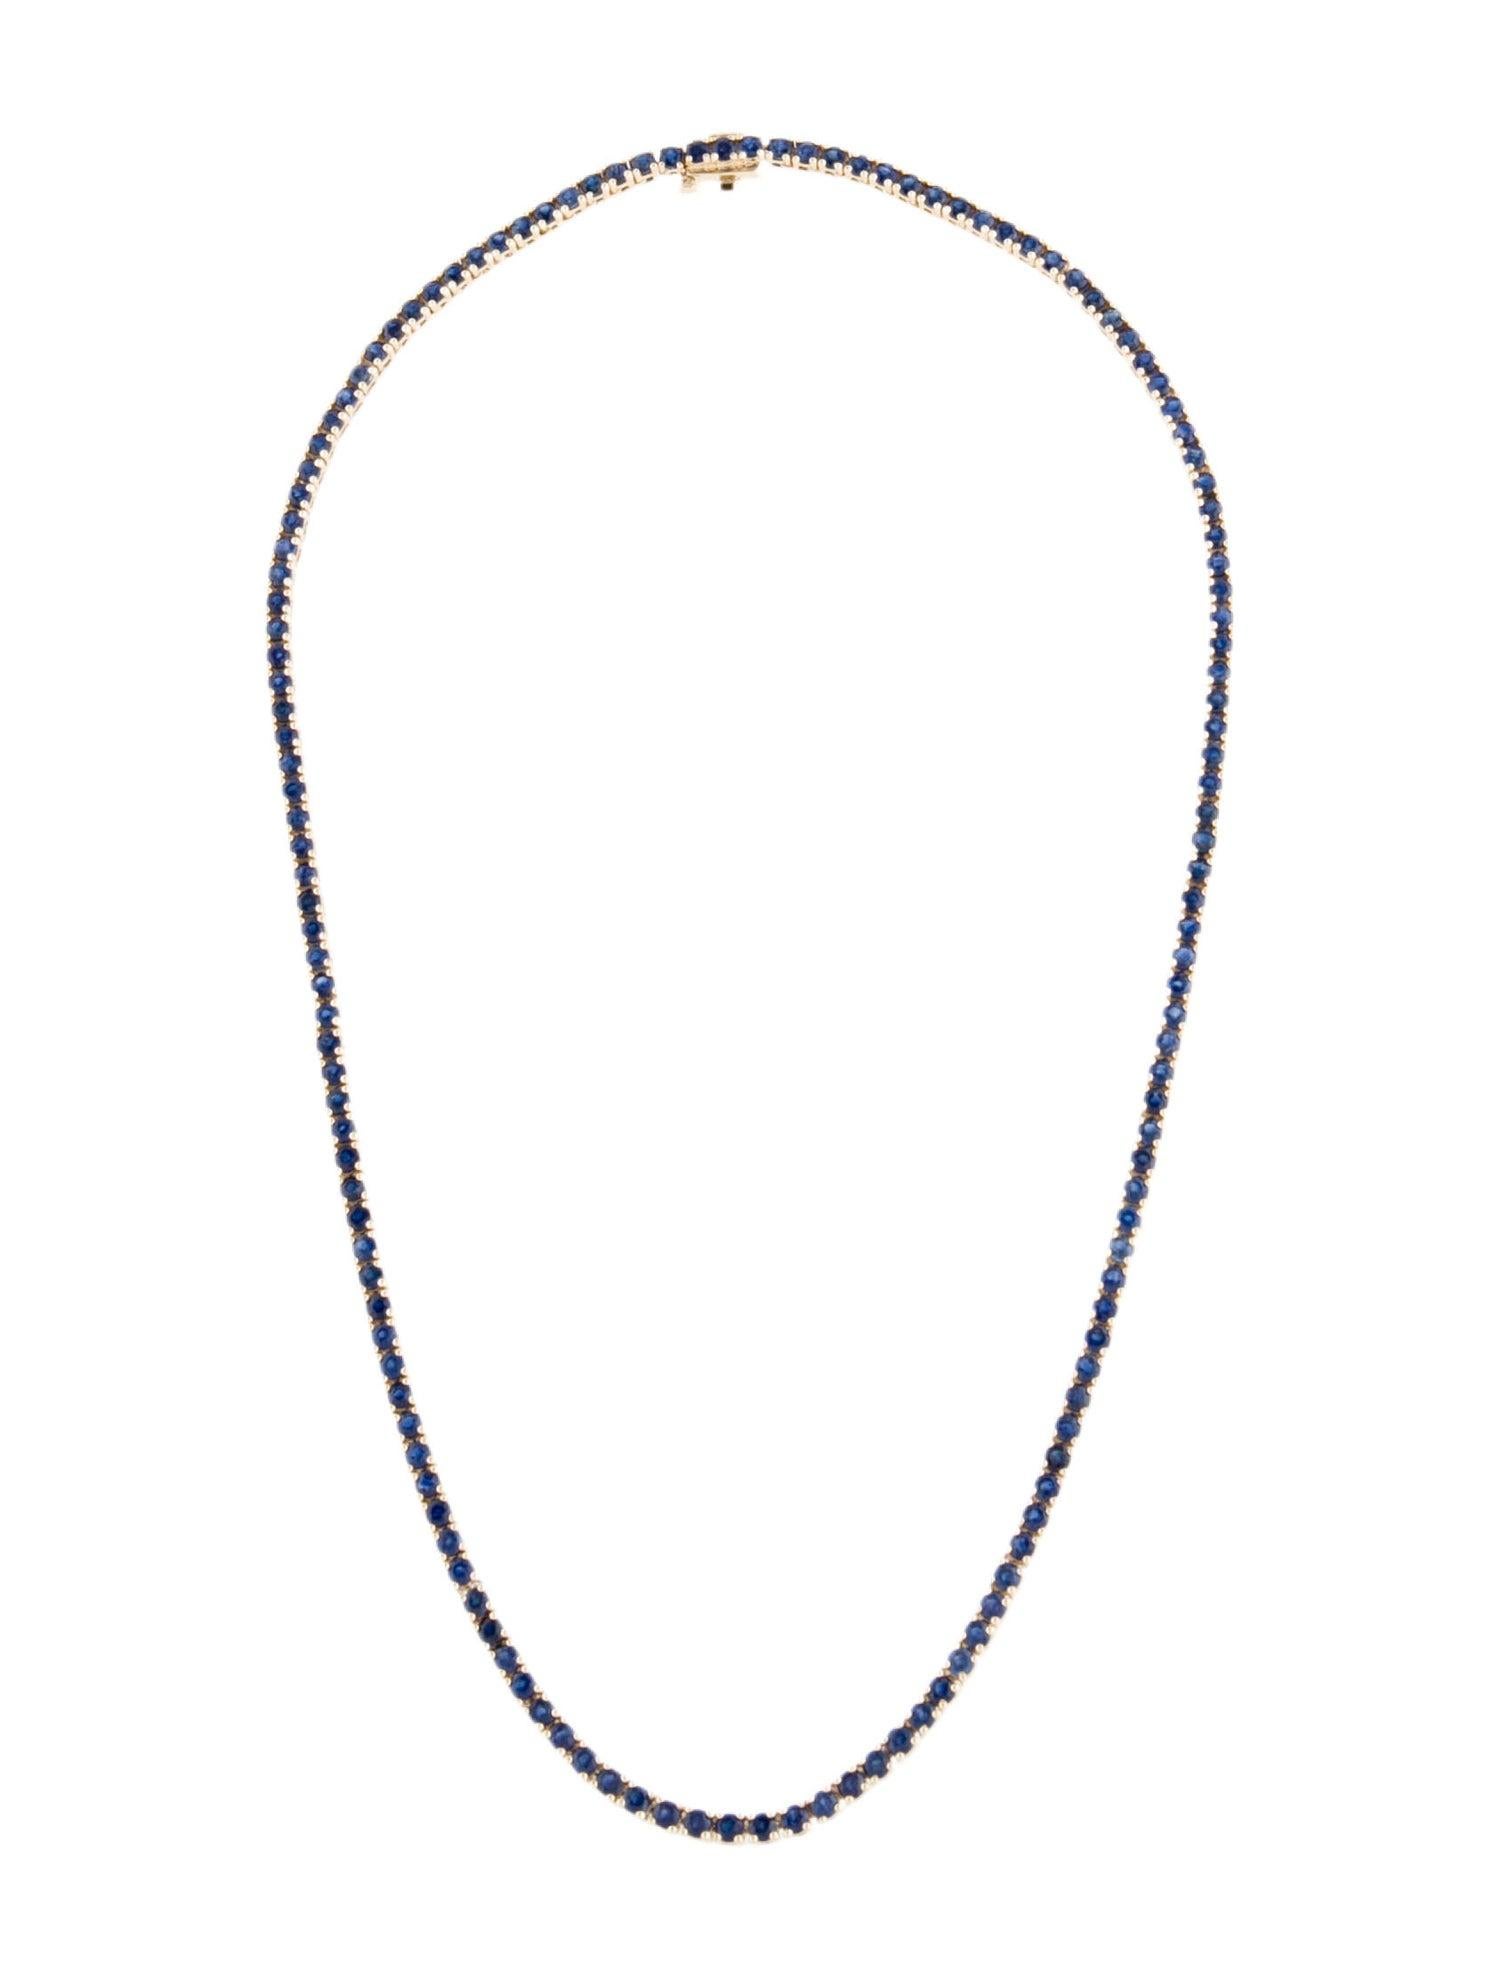 14K Sapphire Chain Necklace 15.26ctw - Exquisite & Timeless Jewelry Piece In New Condition For Sale In Holtsville, NY